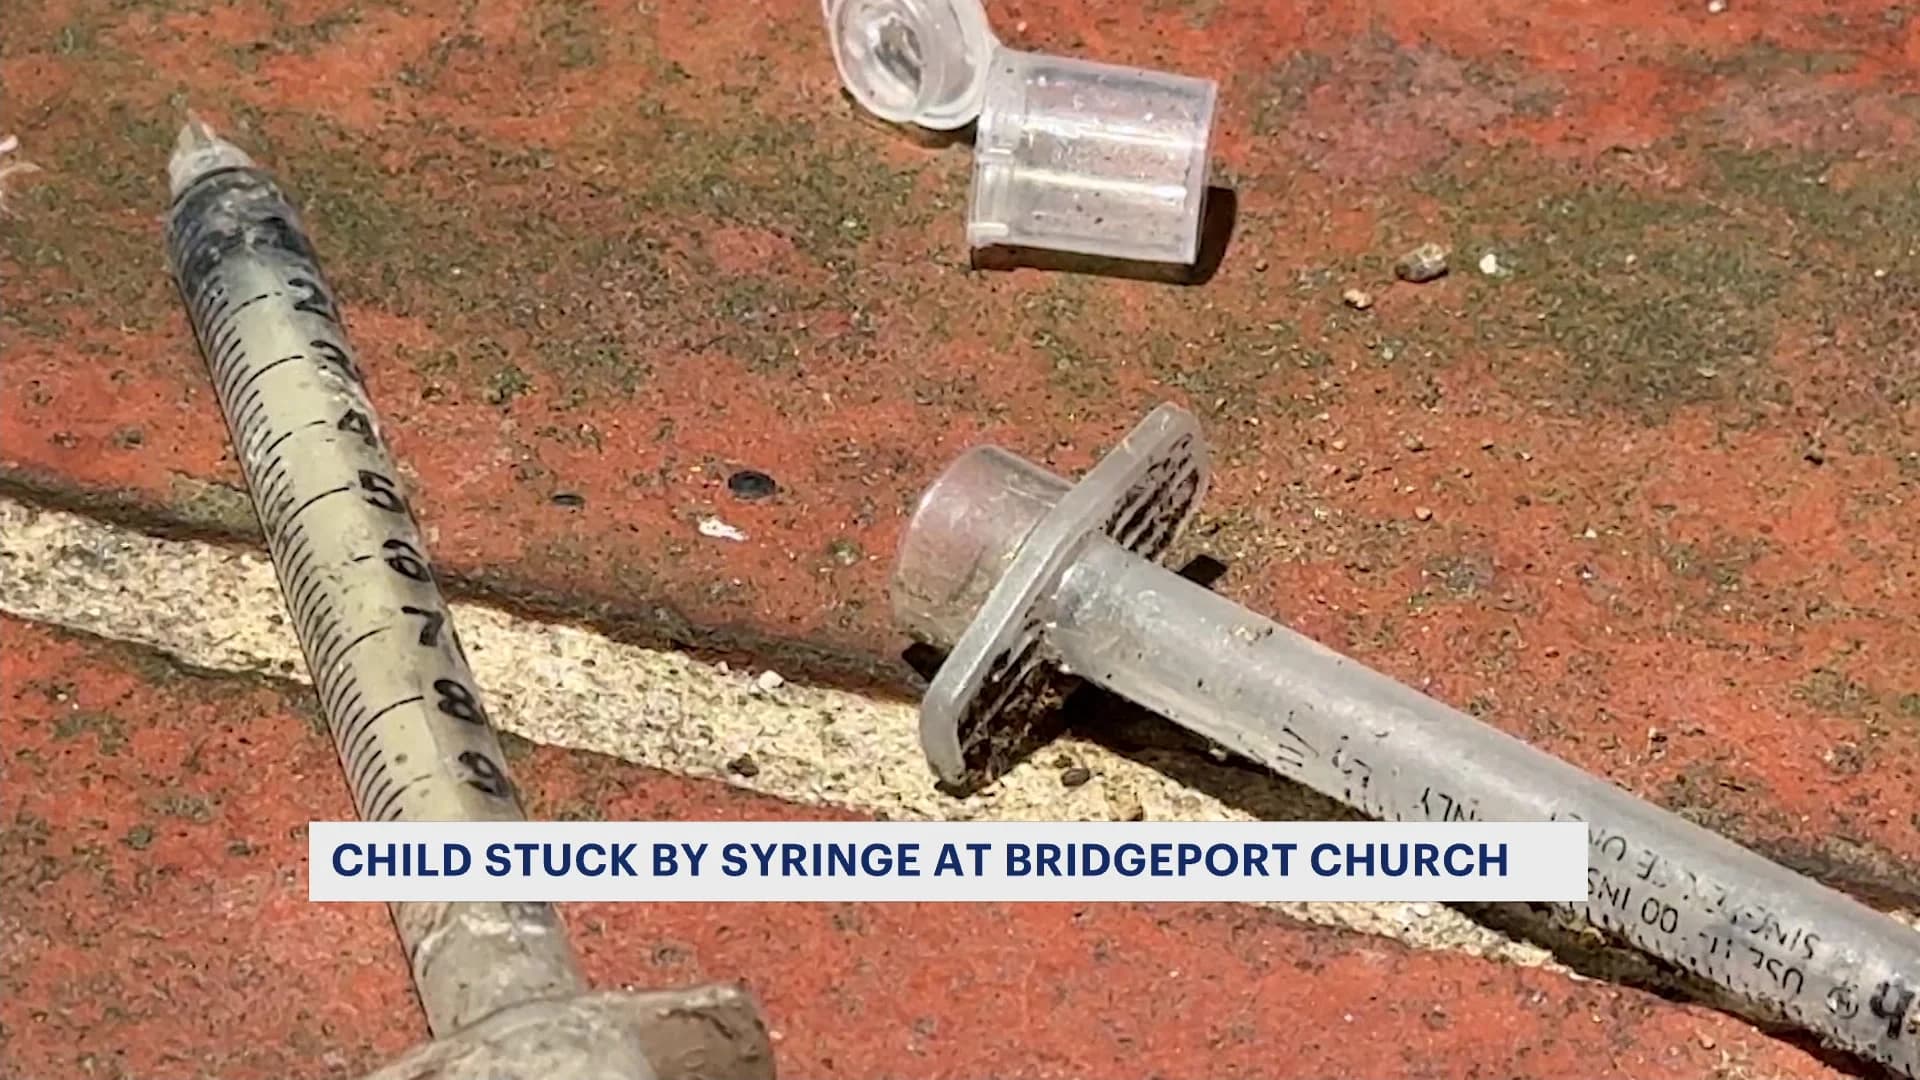 Bridgeport church reported finding hundreds of hypodermic needles on parish property this week